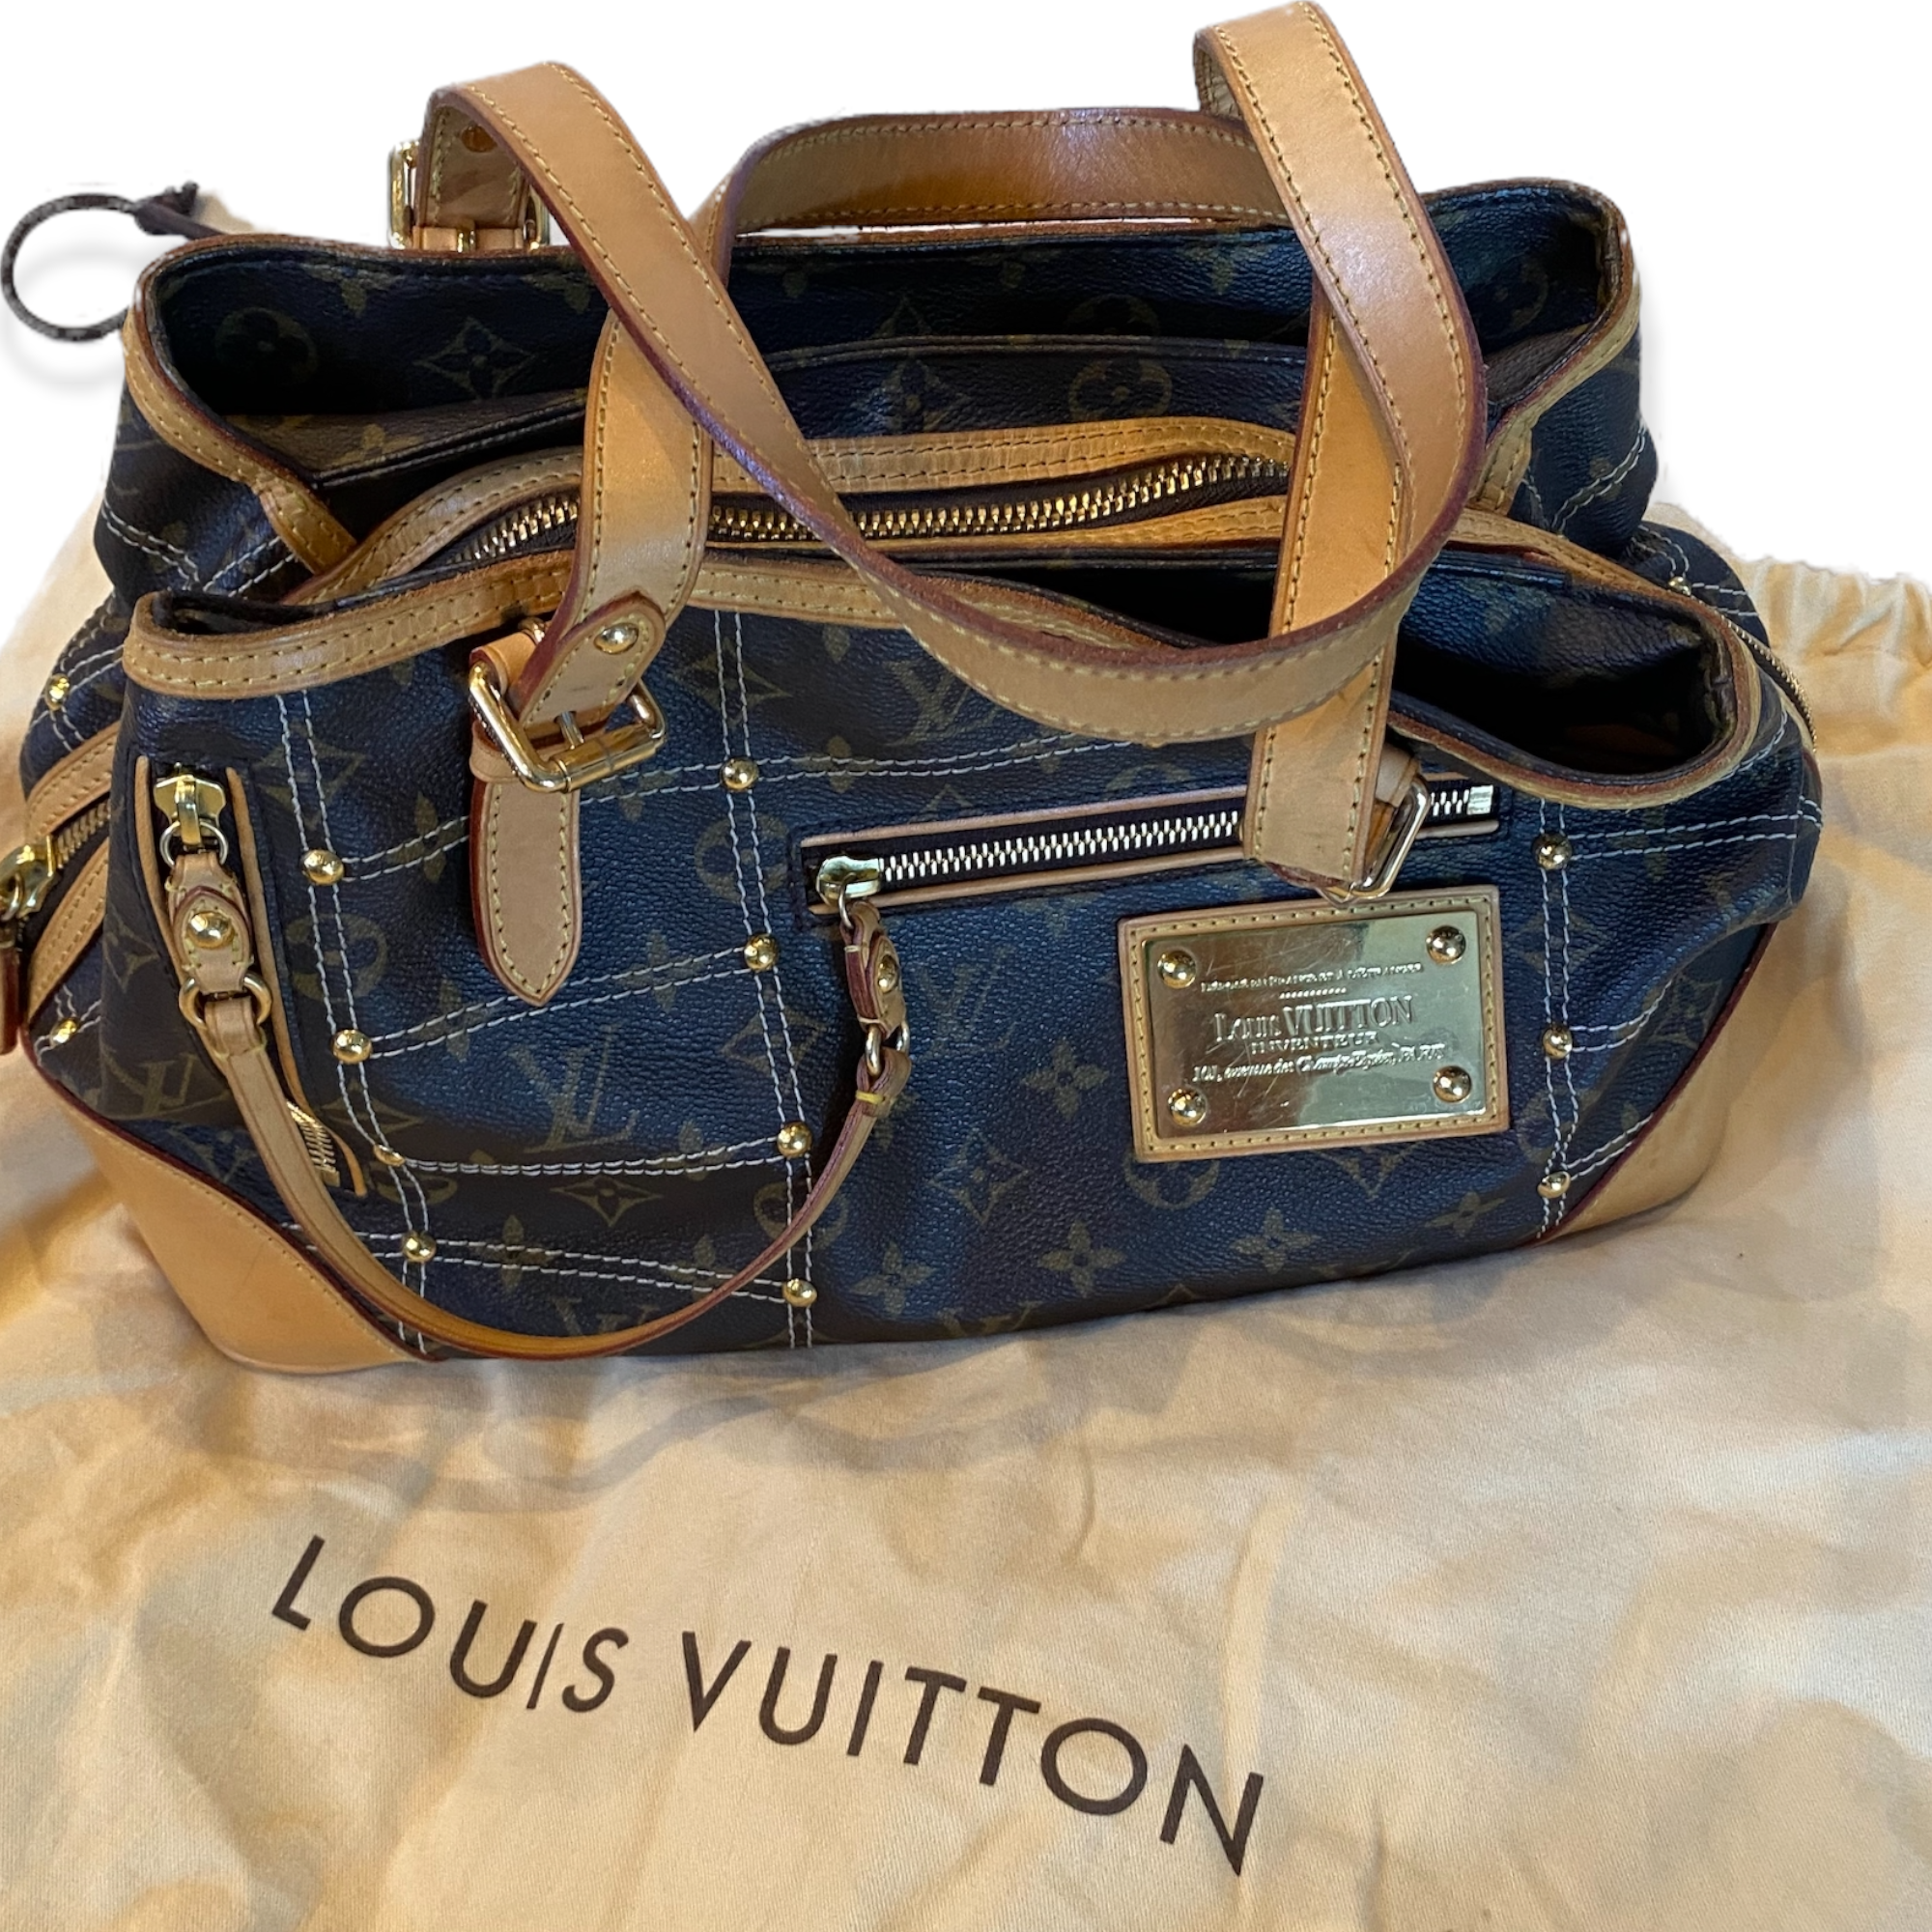 A Limited Edition Louis Vuitton Monogram Riveting Bag by Marc Jacobs